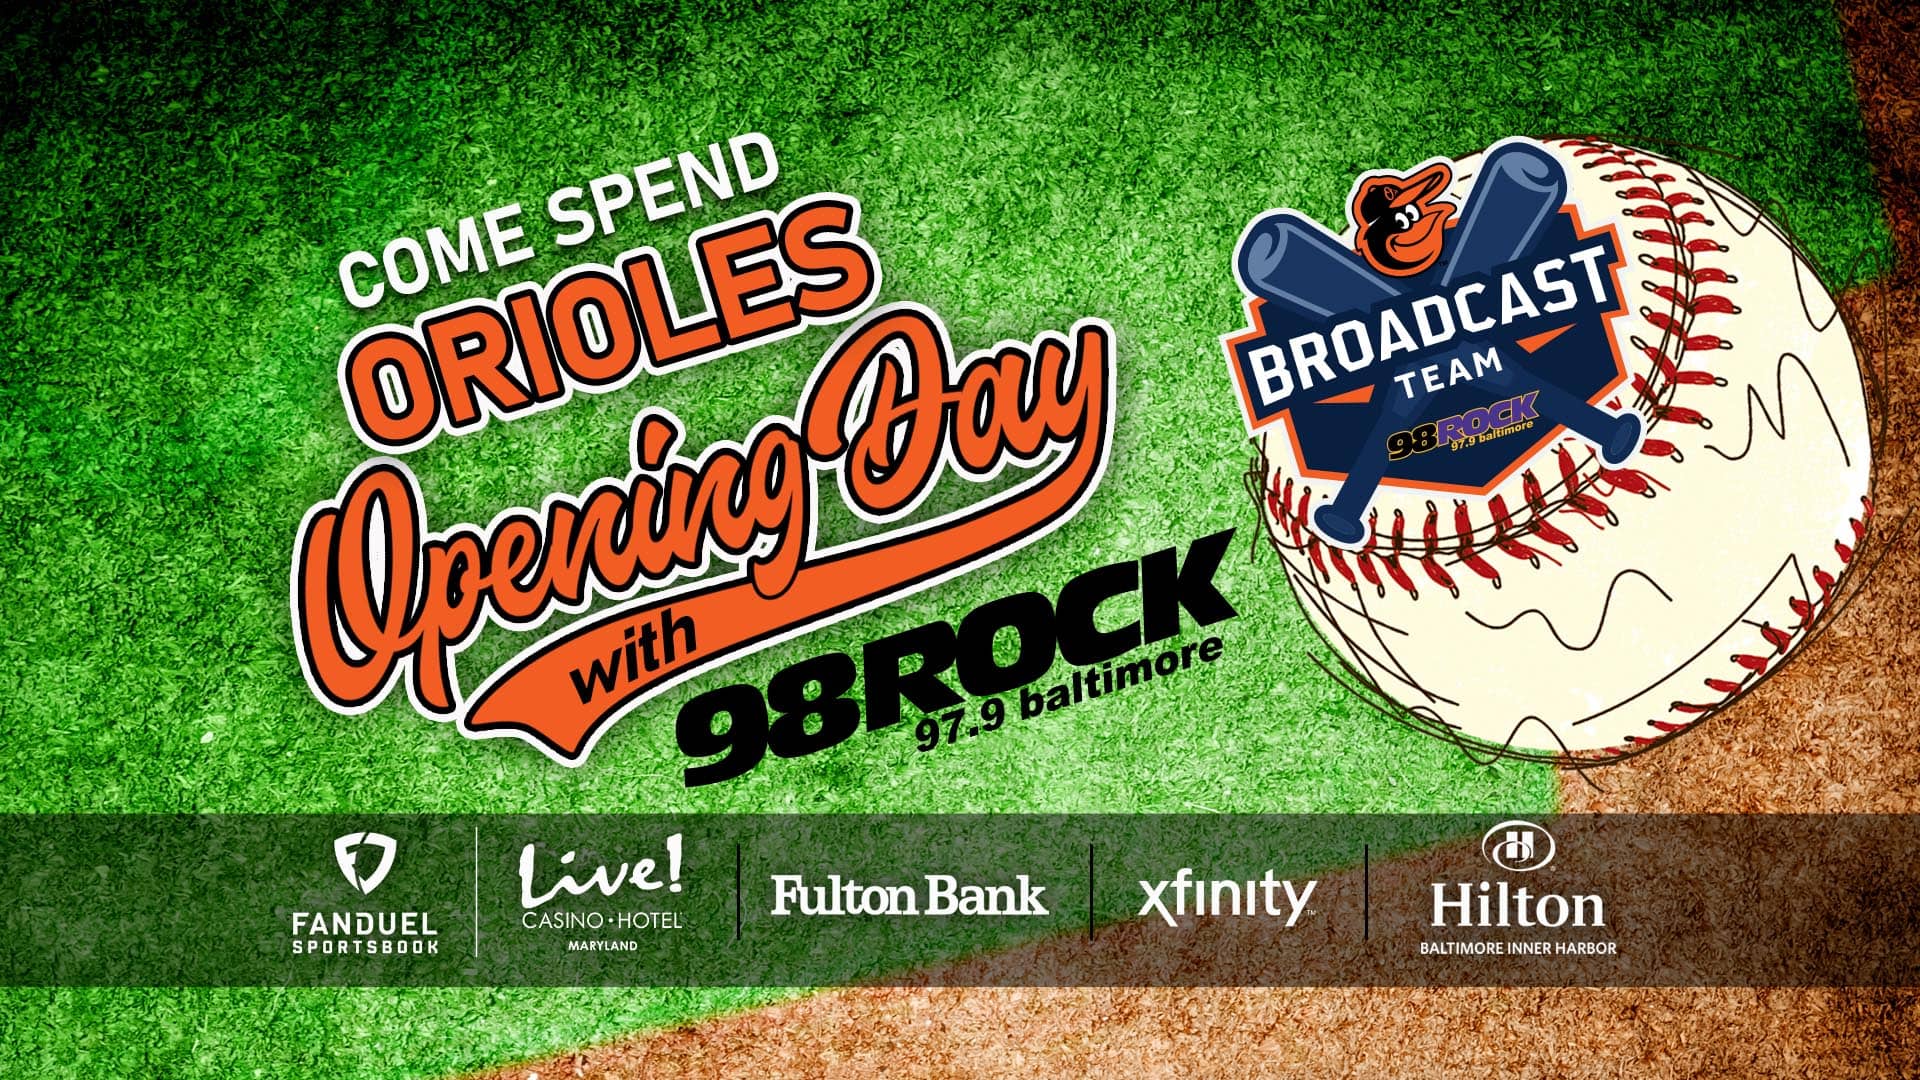 radio-orioles-opening-day-social-update-16x9-98-rock